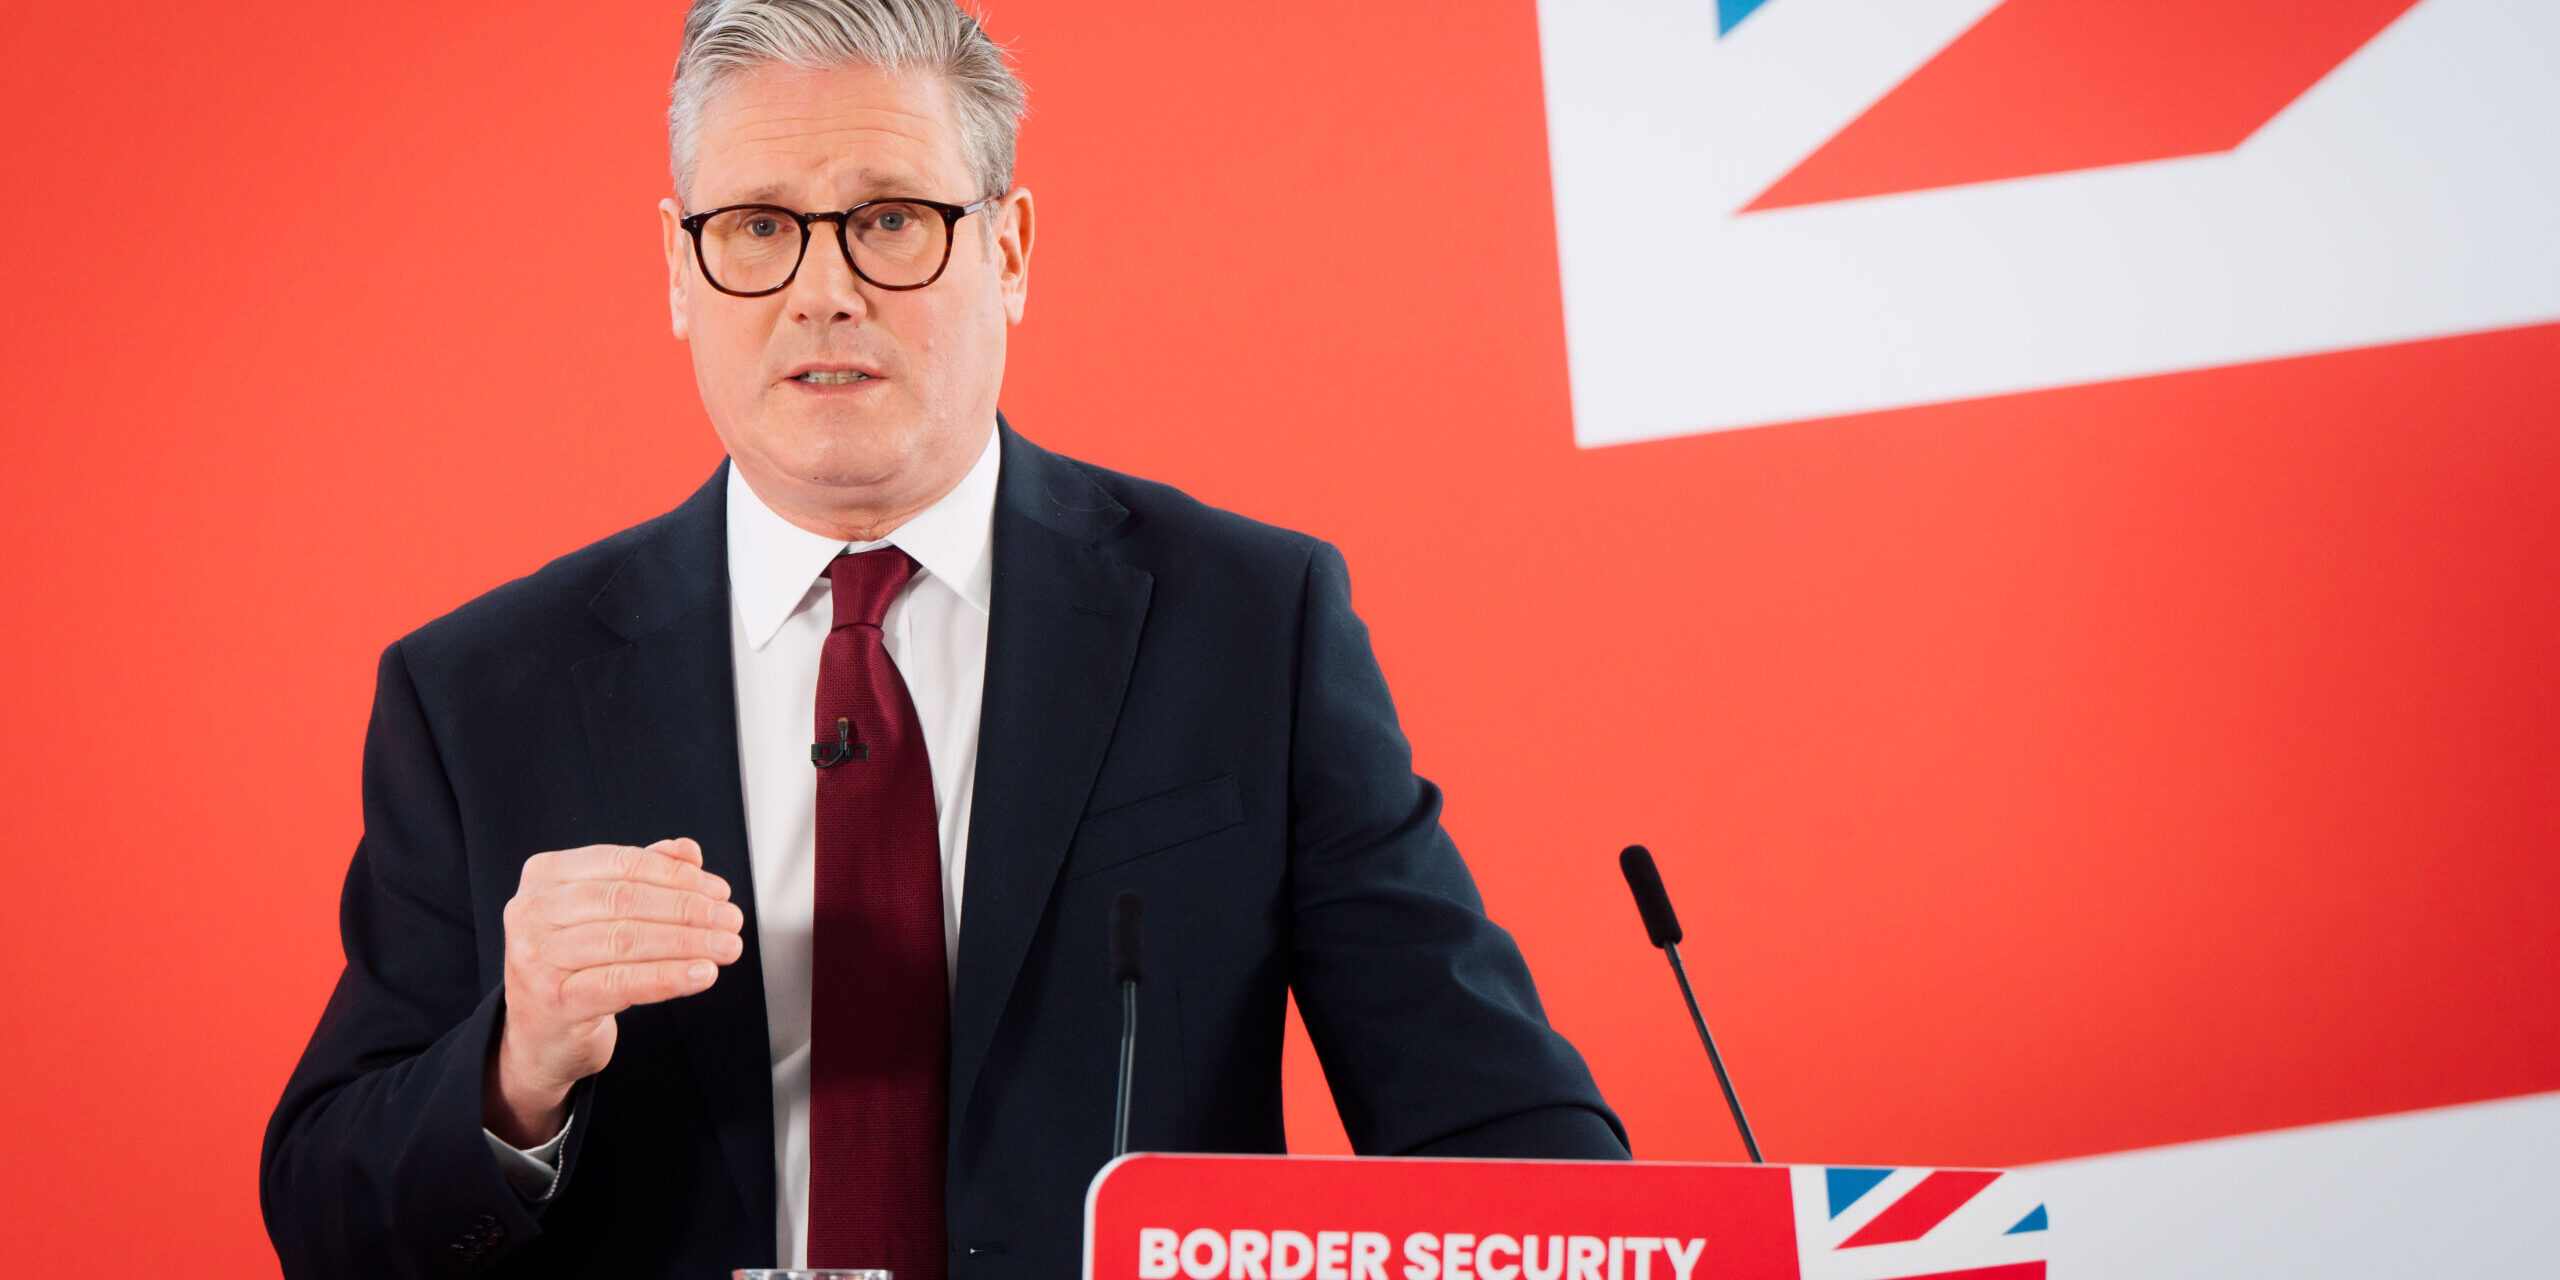 Keir Starmer standing at a podium in front of a Union Jack backdrop. The podium says 'Border security' on it